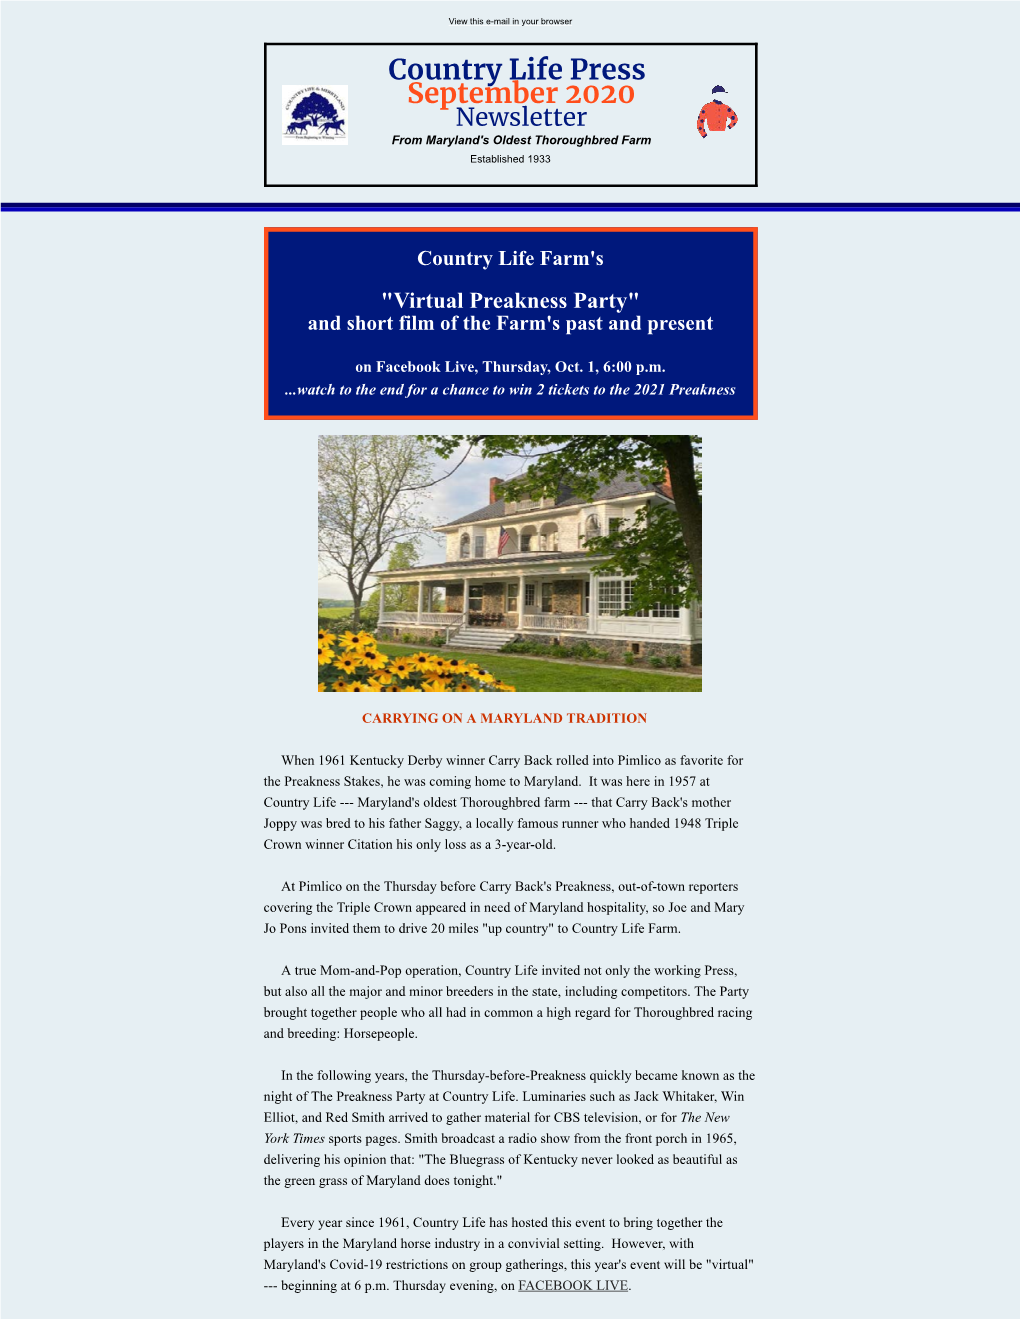 Country Life Press September 2020 Newsletter from Maryland's Oldest Thoroughbred Farm Established 1933